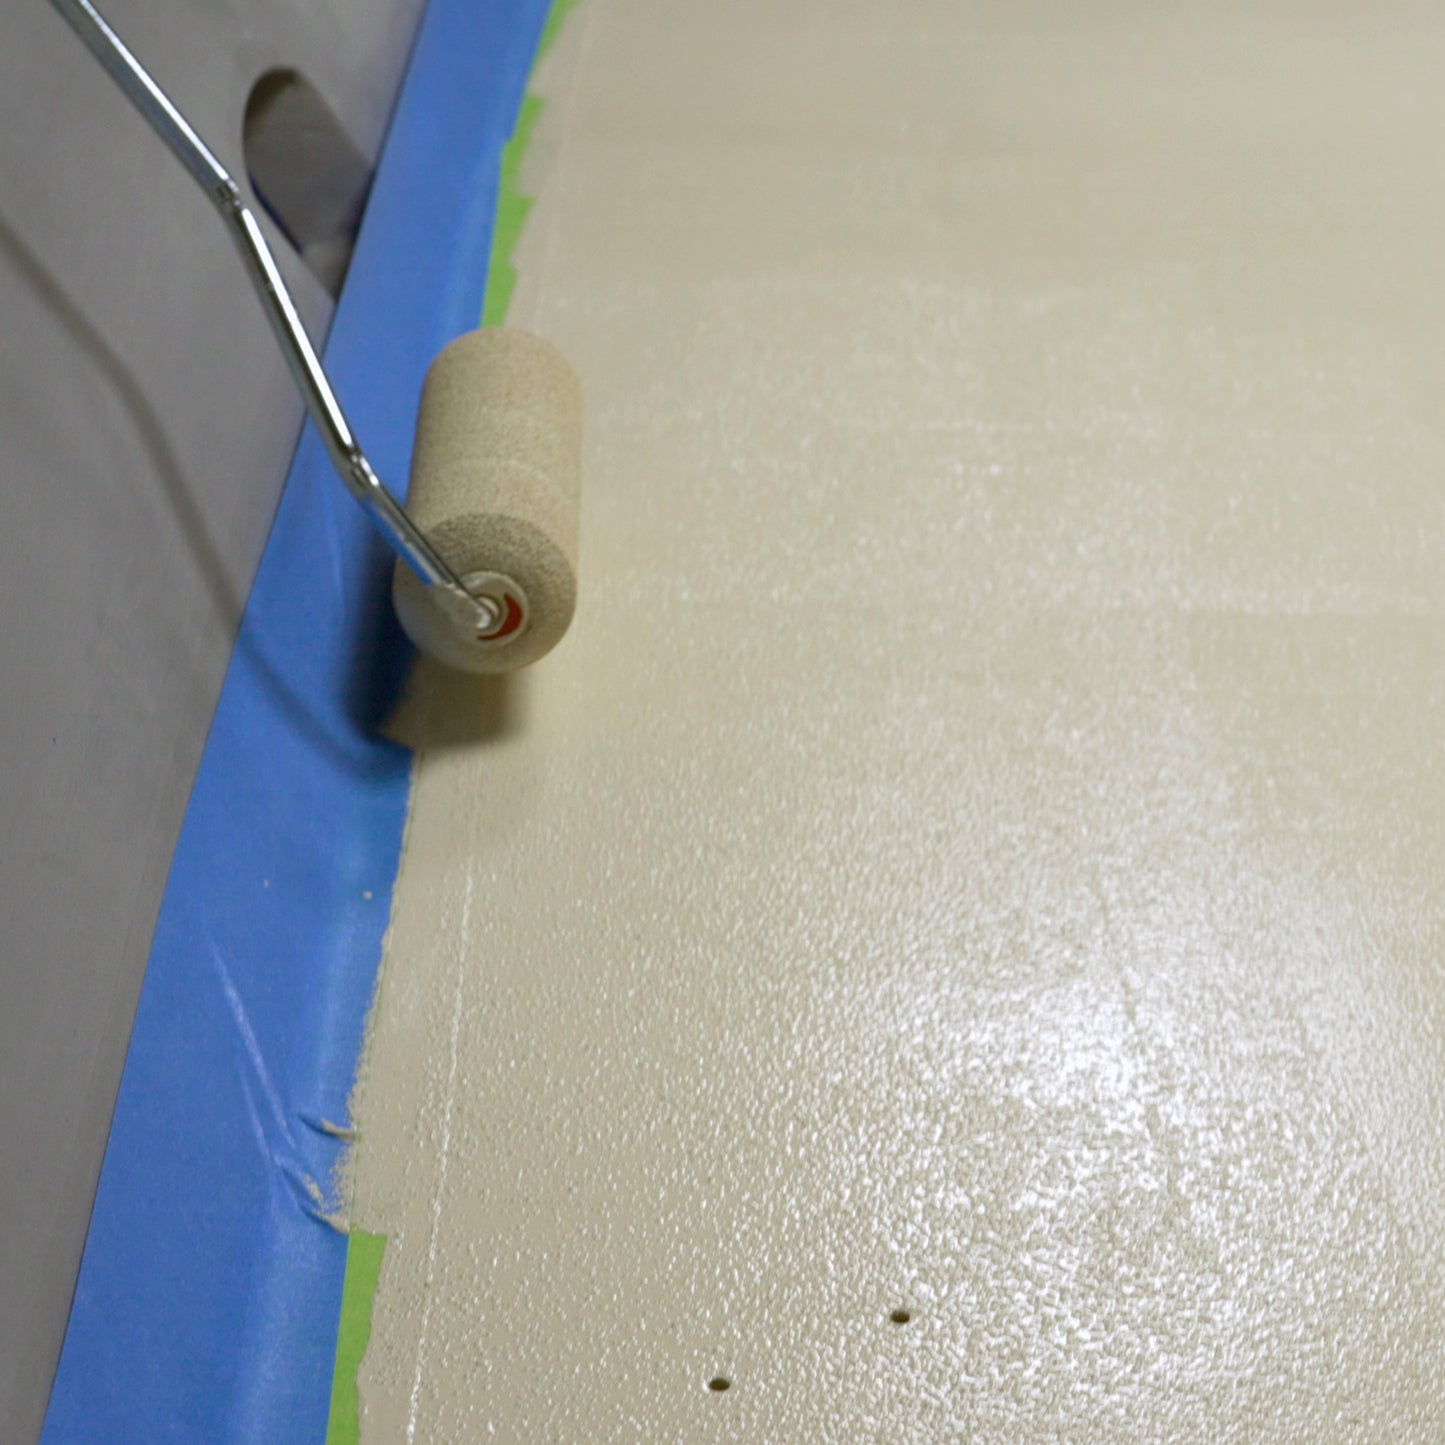 TotalBoat TotalTread Non-Skid Marine Deck Paint sand beige being rolled on a boat